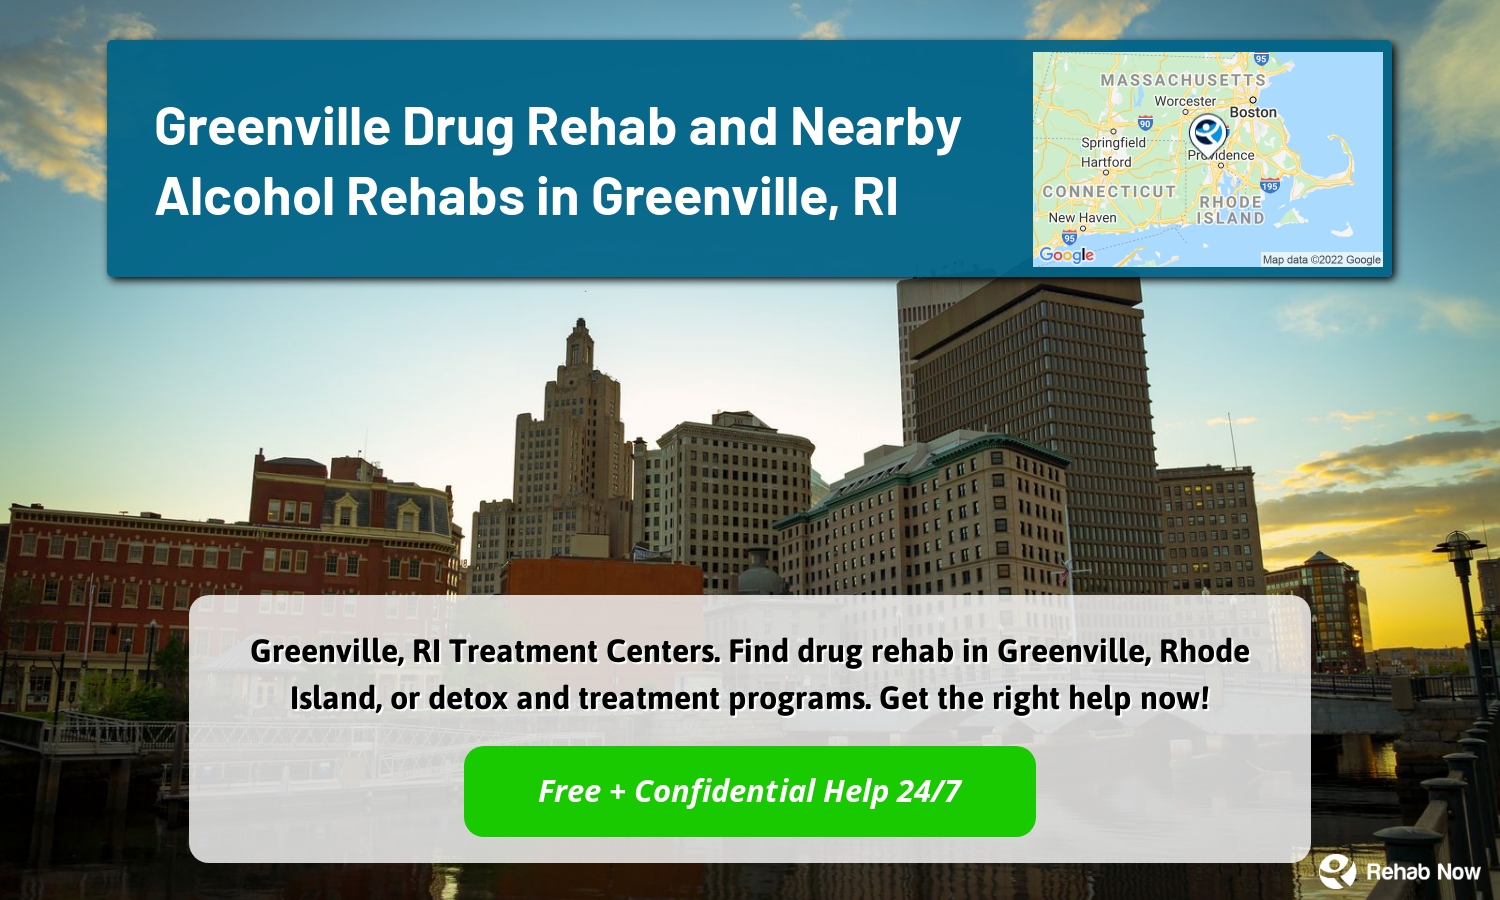 Greenville, RI Treatment Centers. Find drug rehab in Greenville, Rhode Island, or detox and treatment programs. Get the right help now!